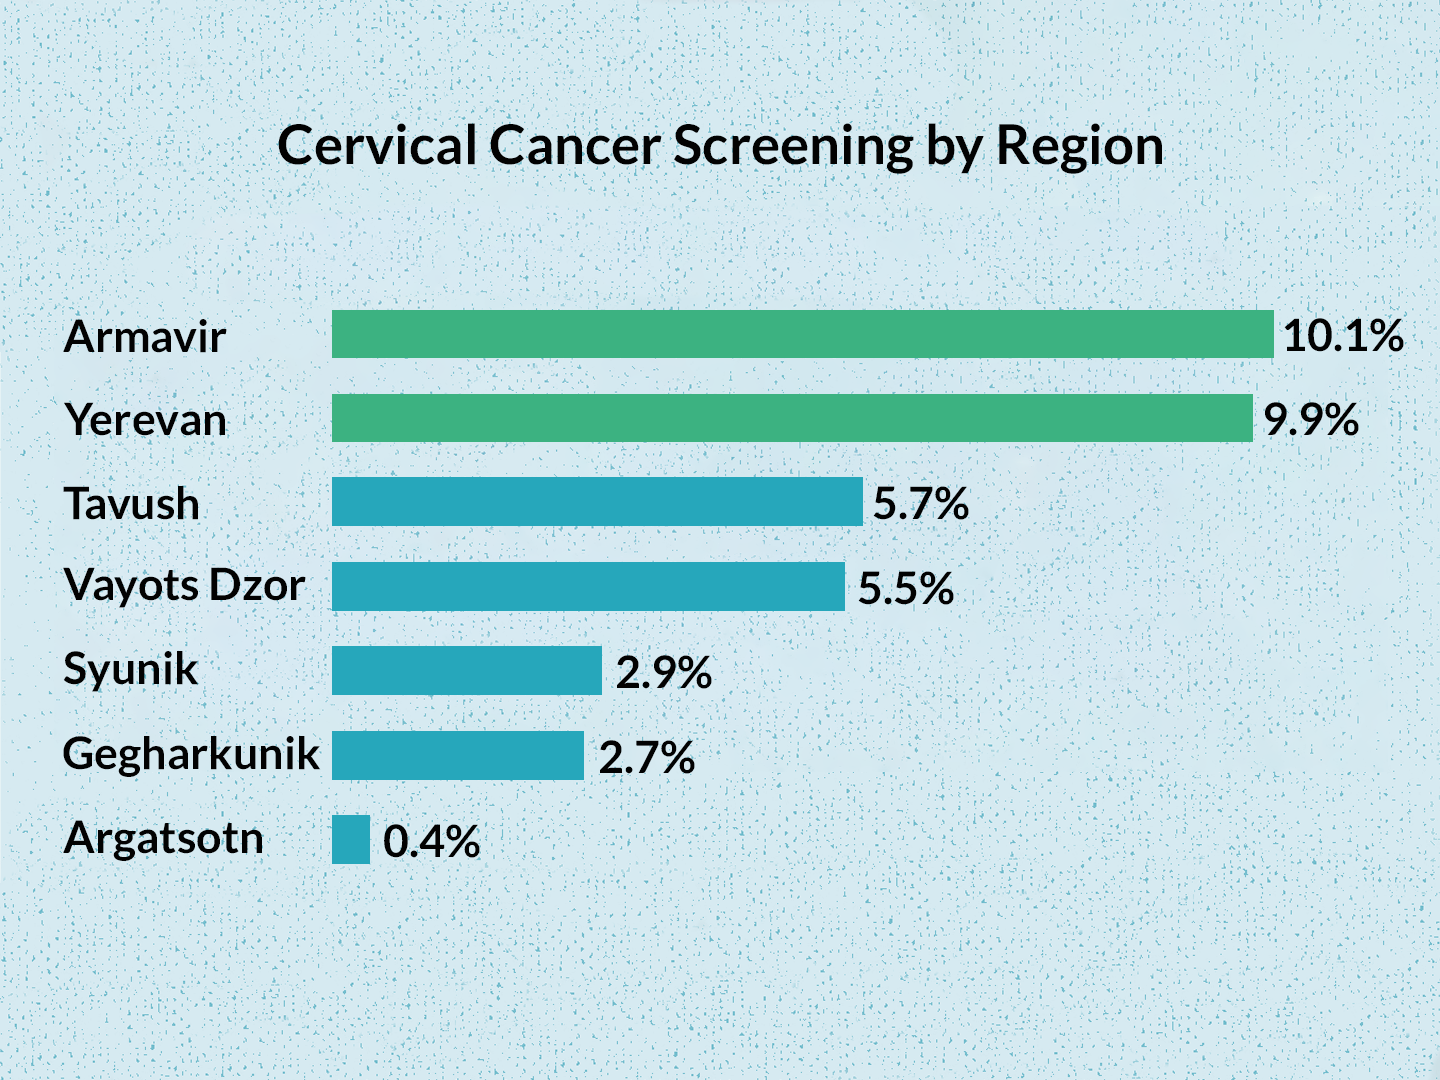 Cervical Cancer Screening by Region in Armenia